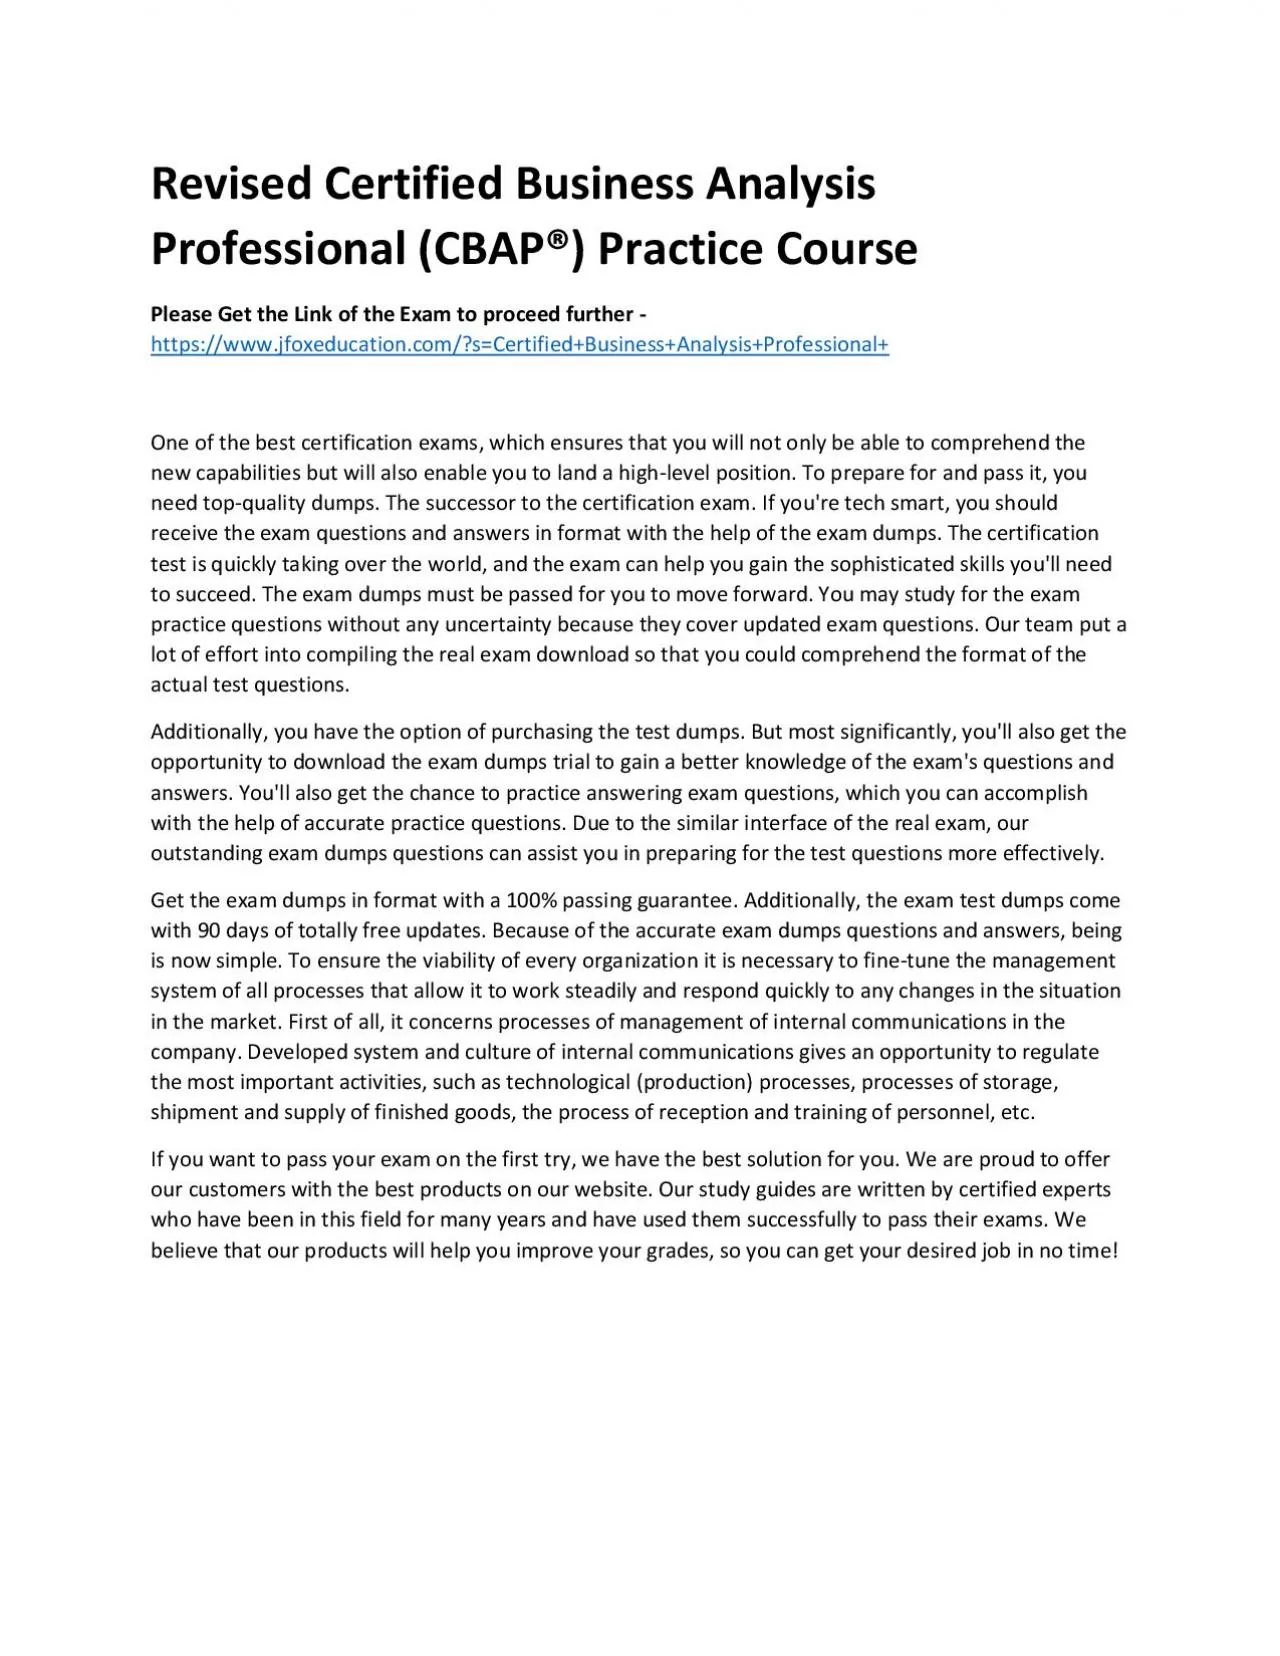 Revised Certified Business Analysis Professional (CBAP®) Practice Course